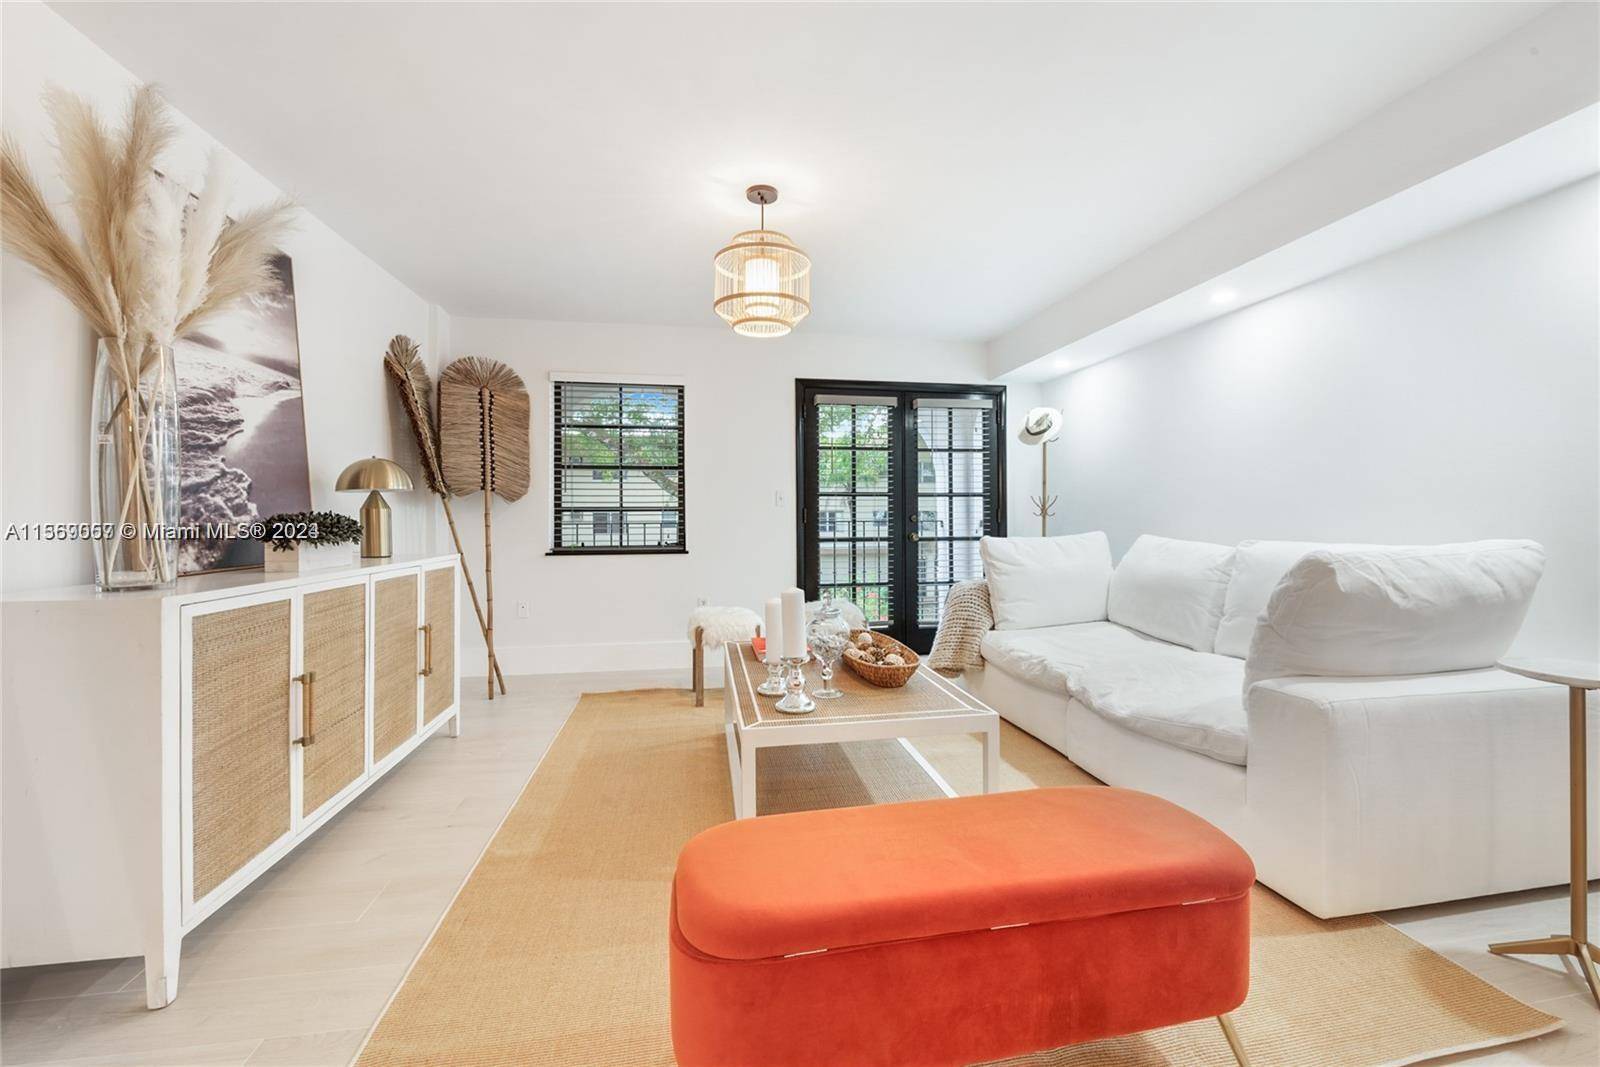 Totally renovated, contemporary Spanish style townhome condo, in a great location 1 block from the CG Youth Center, near Le Jeune Road.